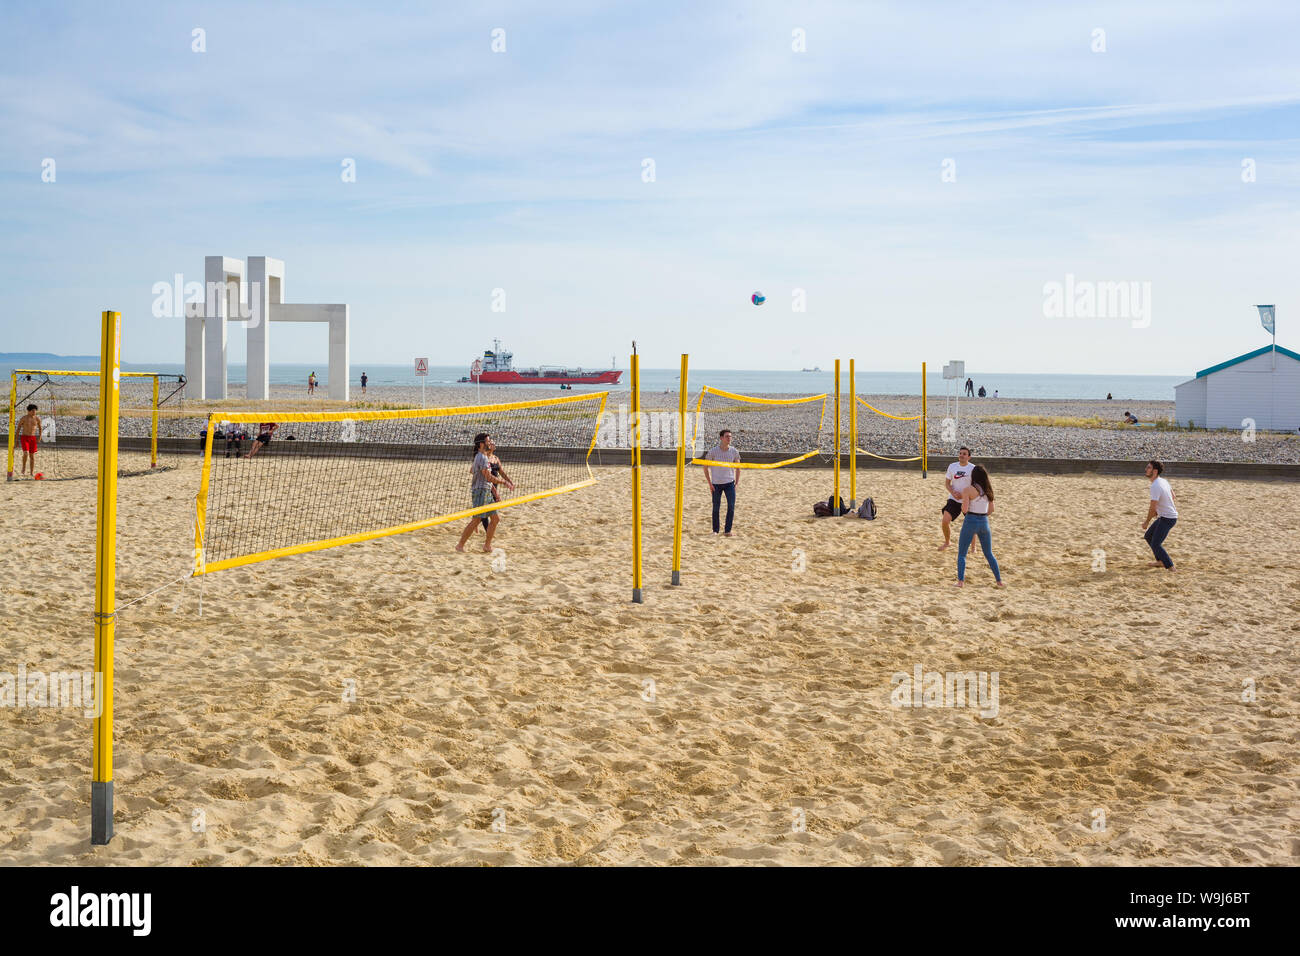 A group playing a game of beach volleyball at Sainte Adresse, Le Havre, Normandy, France as a tanker sails past Stock Photo